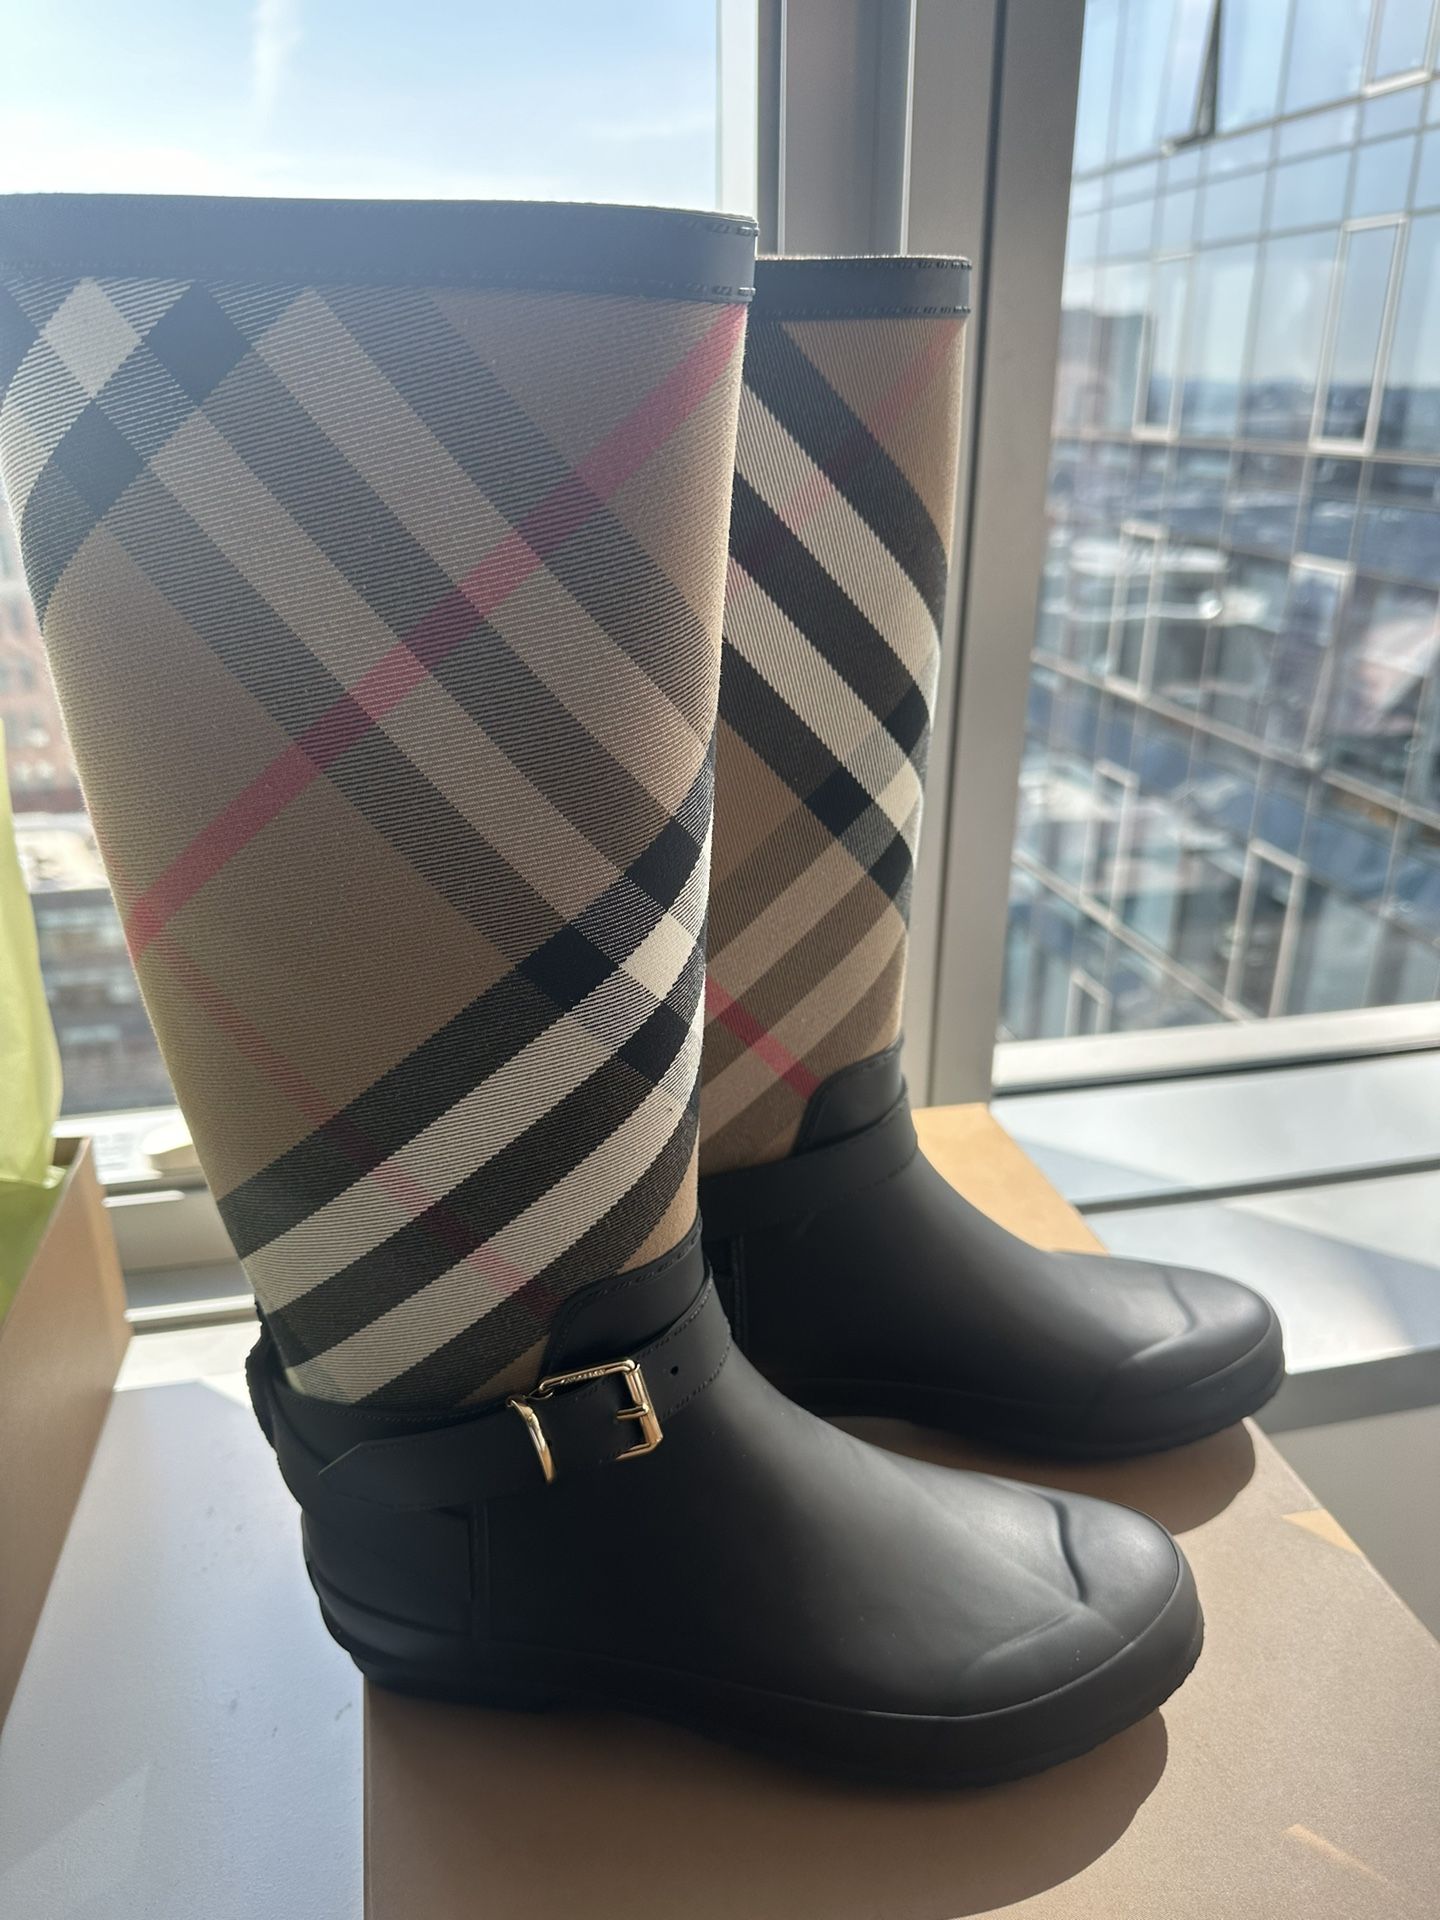 Authentic Burberry Rain boots - brand New Never Worn